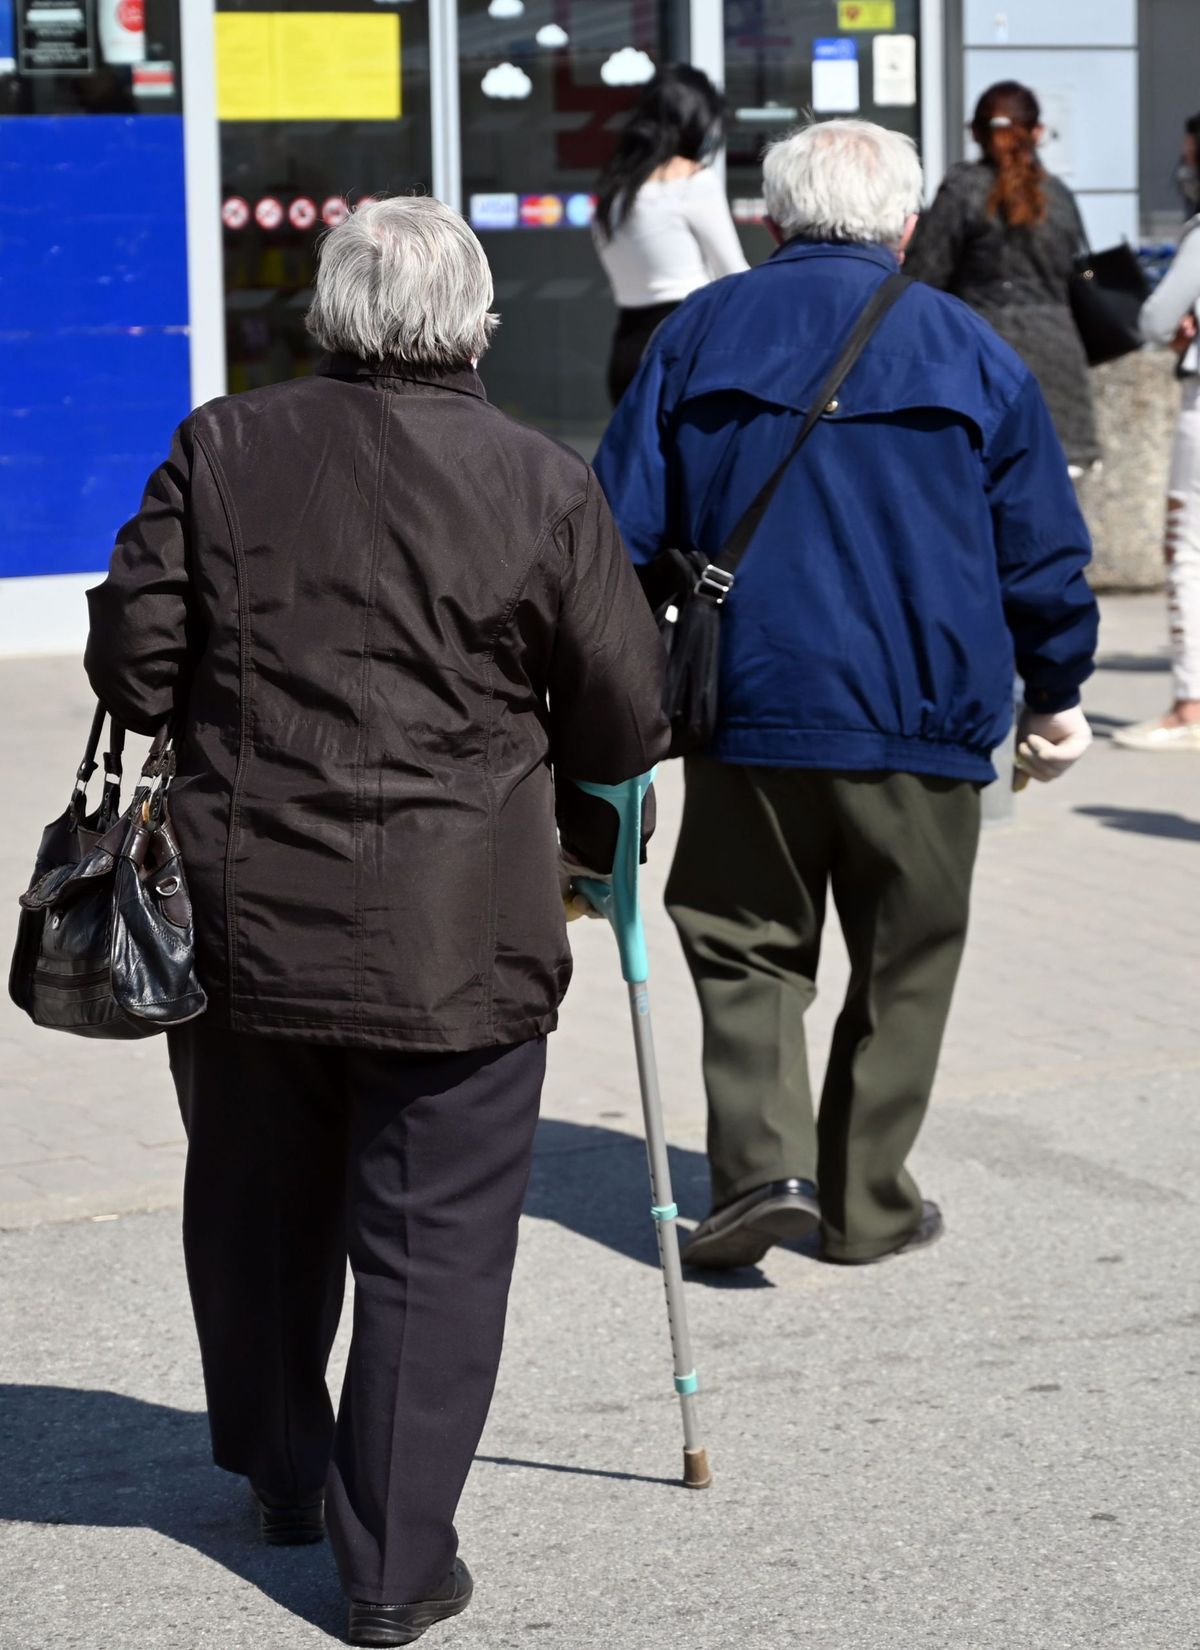 Special Shopping Hours for Elderly to Be Scrapped as of May 9